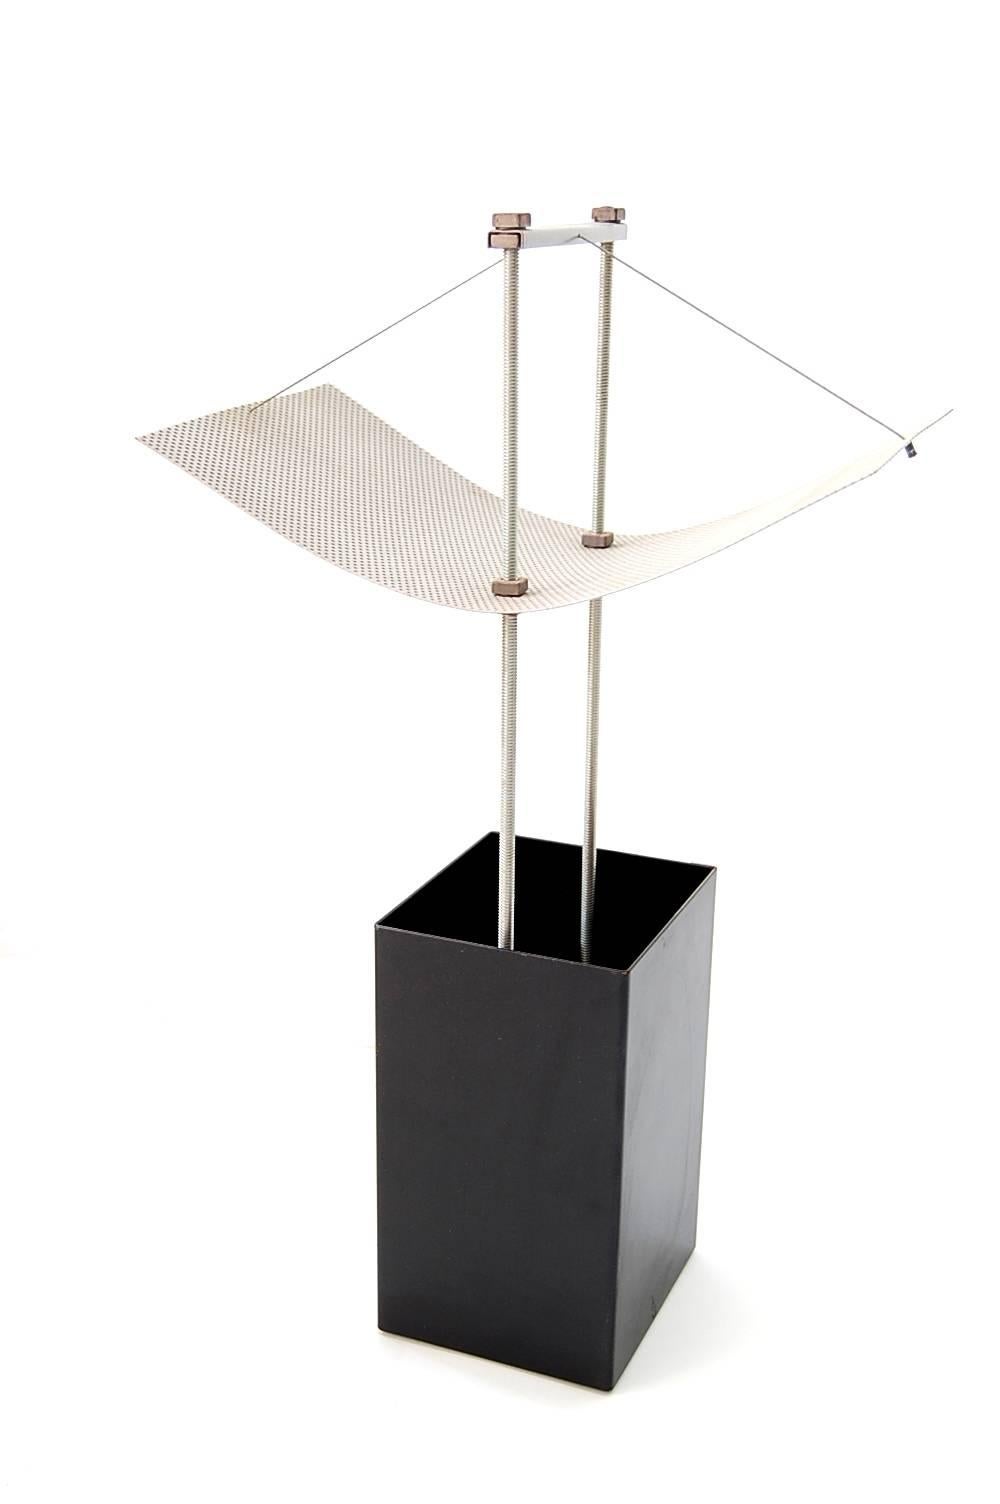 Table lamp, circa 1982, American. We're unsure who designed this lamp, but feel that it must have been designed by an Architect due to the form, and choices of materials. The black body contains the bulb, that when lit, shines upwards at the